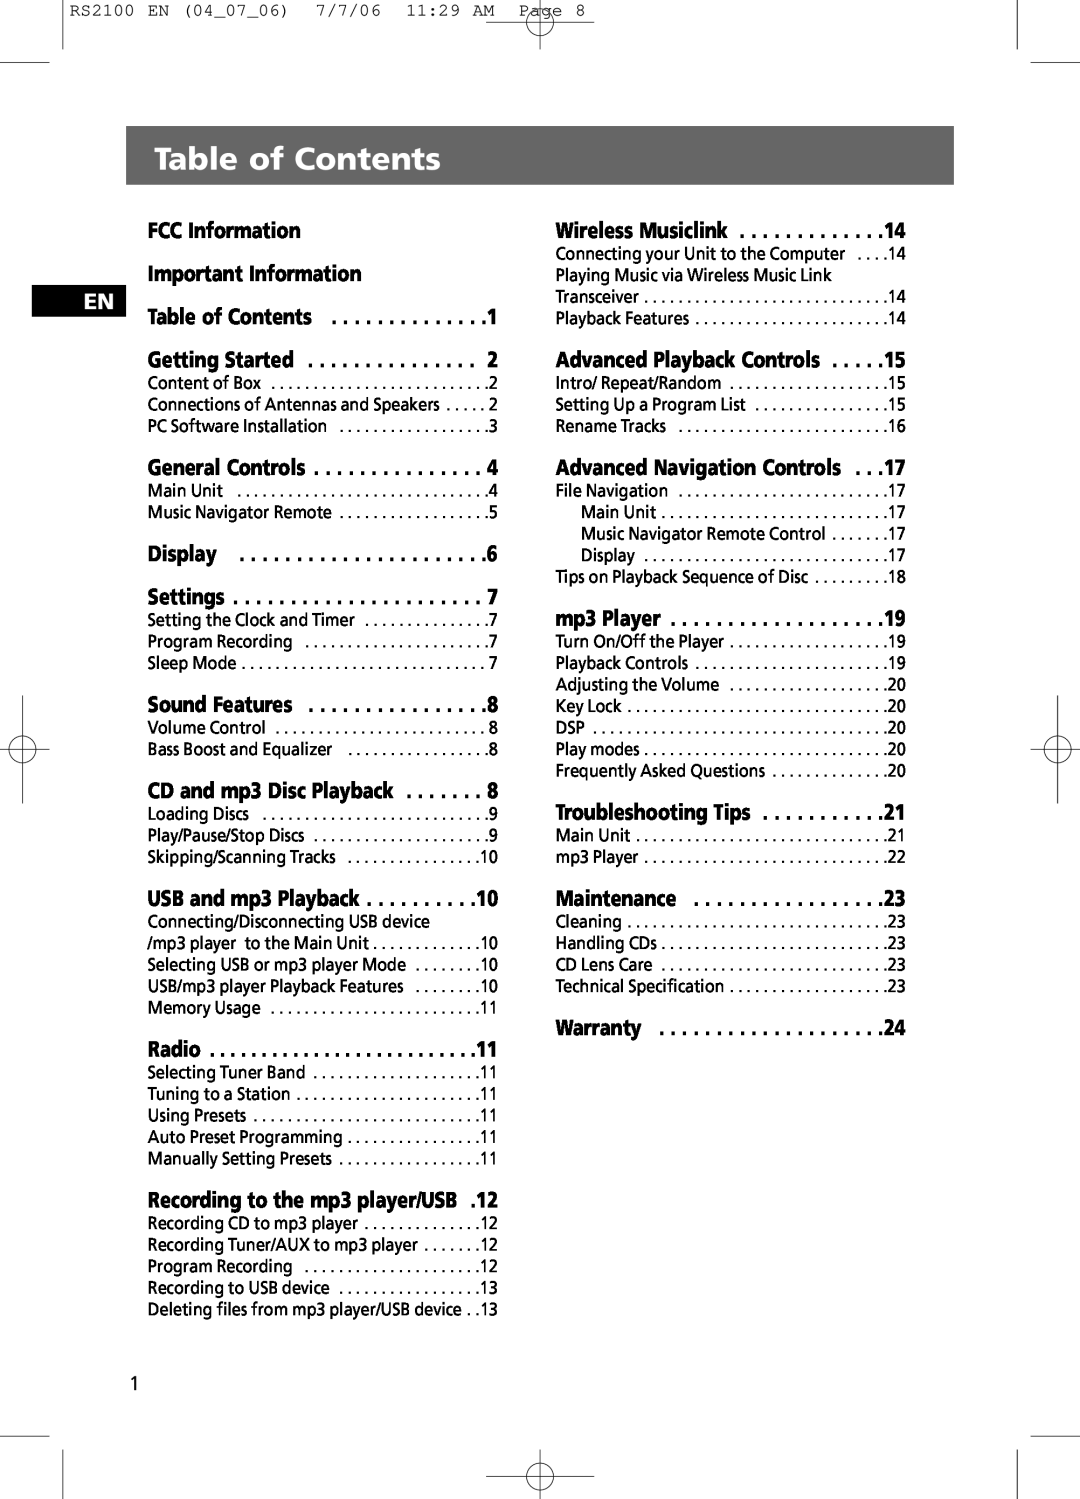 RCA RS2100 user manual Table of Contents 